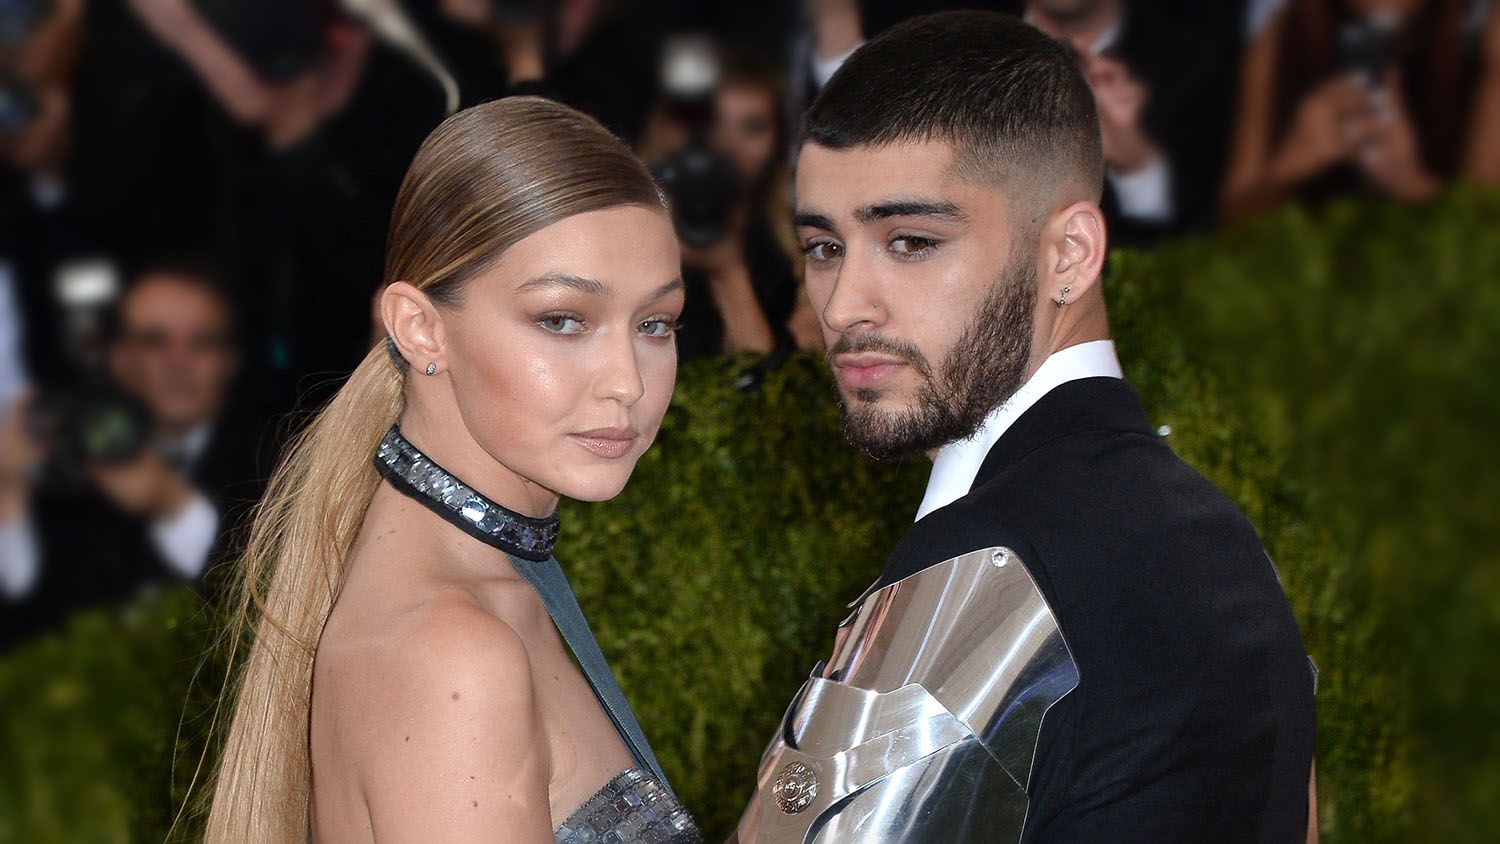 Gigi Hadid has sparked rumours that her and Zayn Malik are engaged